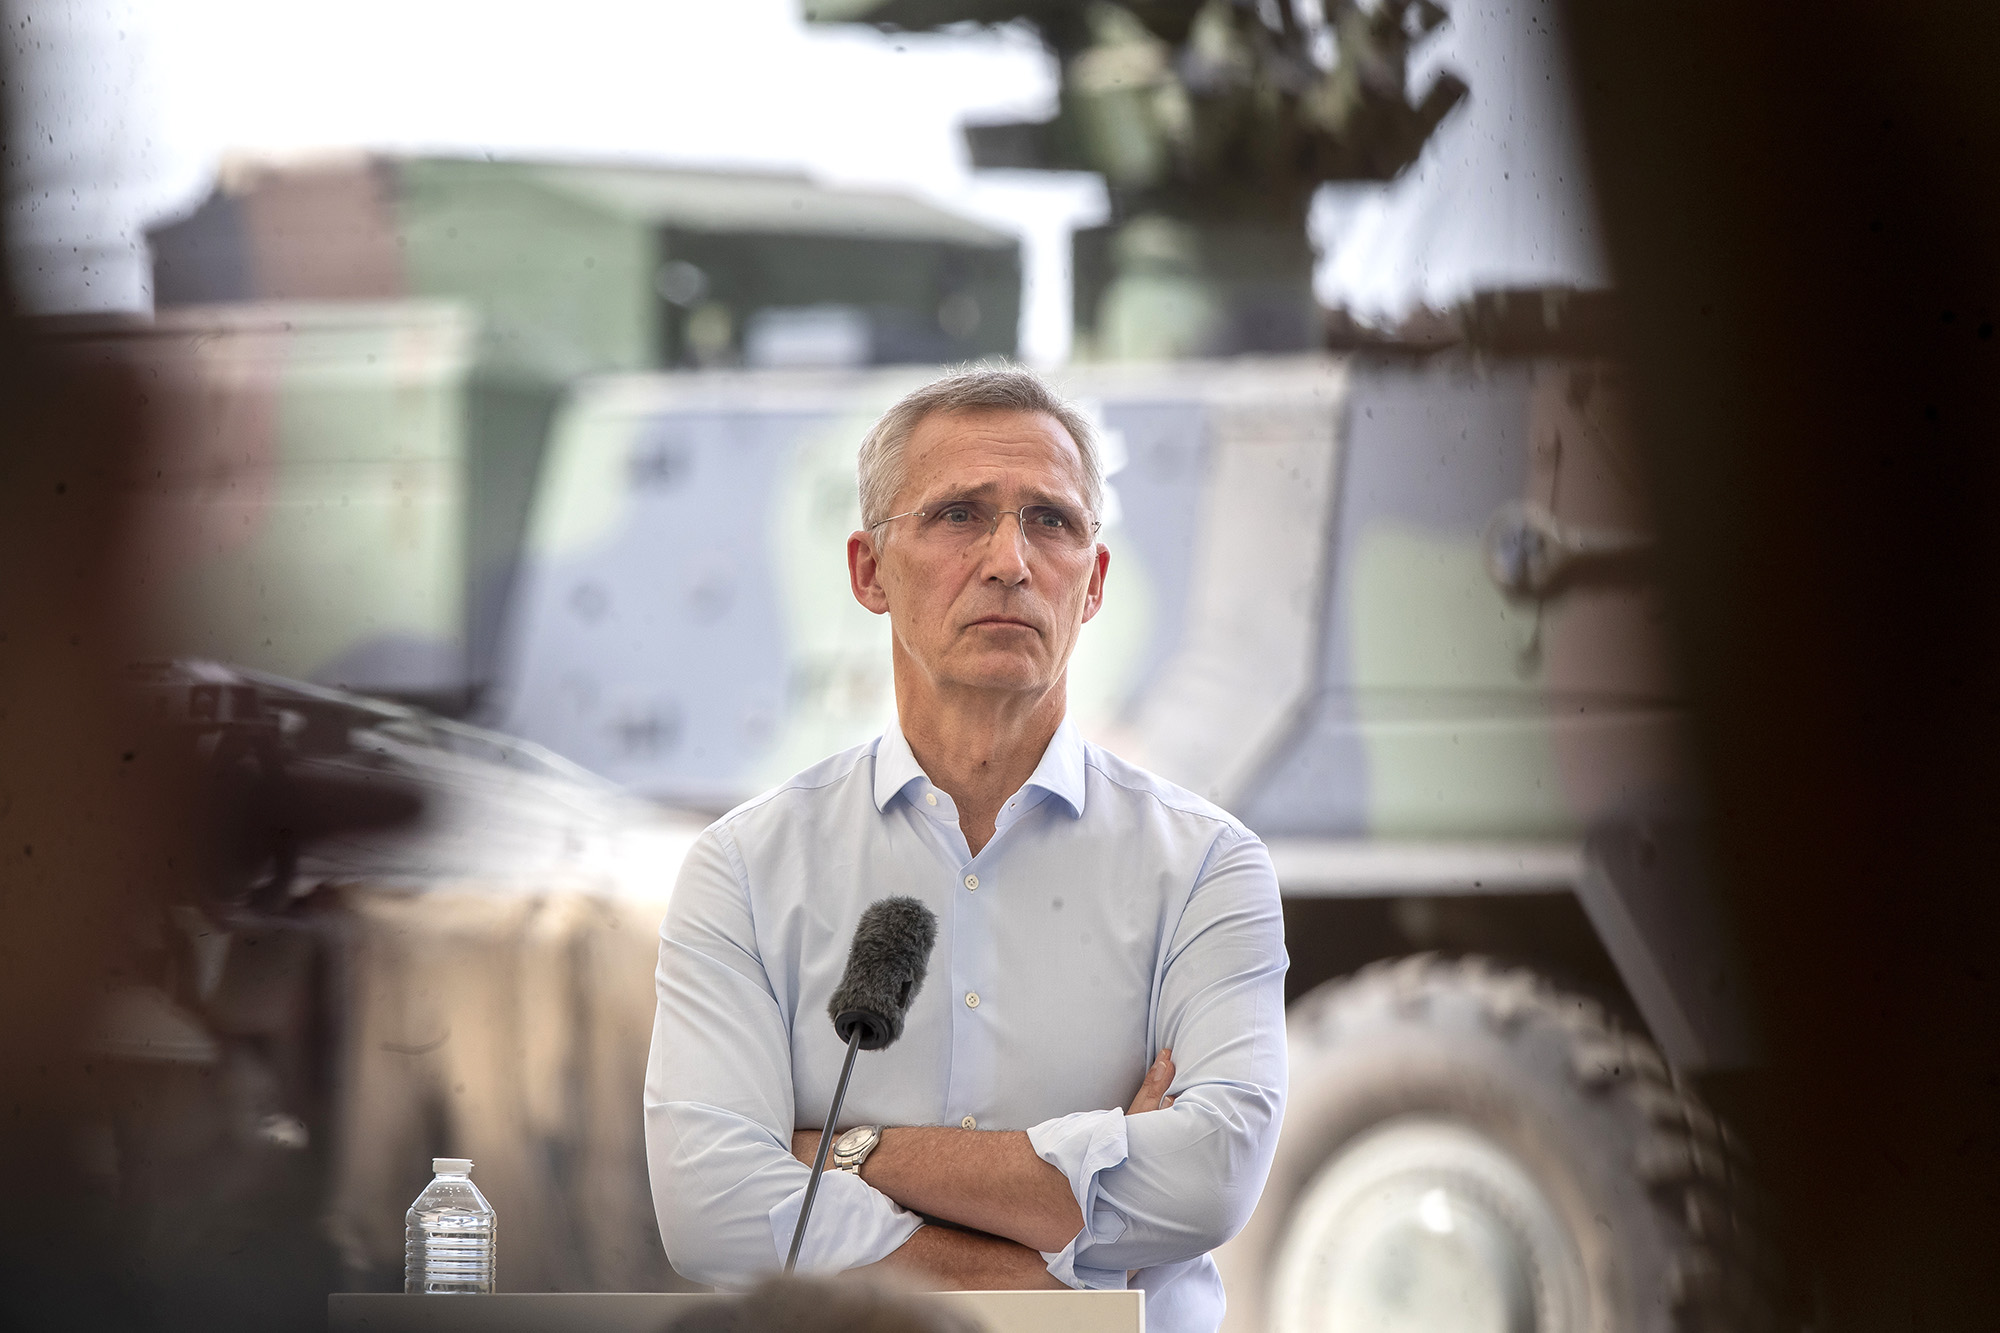 NATO Secretary General Jens Stoltenberg speaks during a press conference at Exercise Griffin Storm 2023 after visiting the Training Range in Pabrade, Lithuania, on June 26.